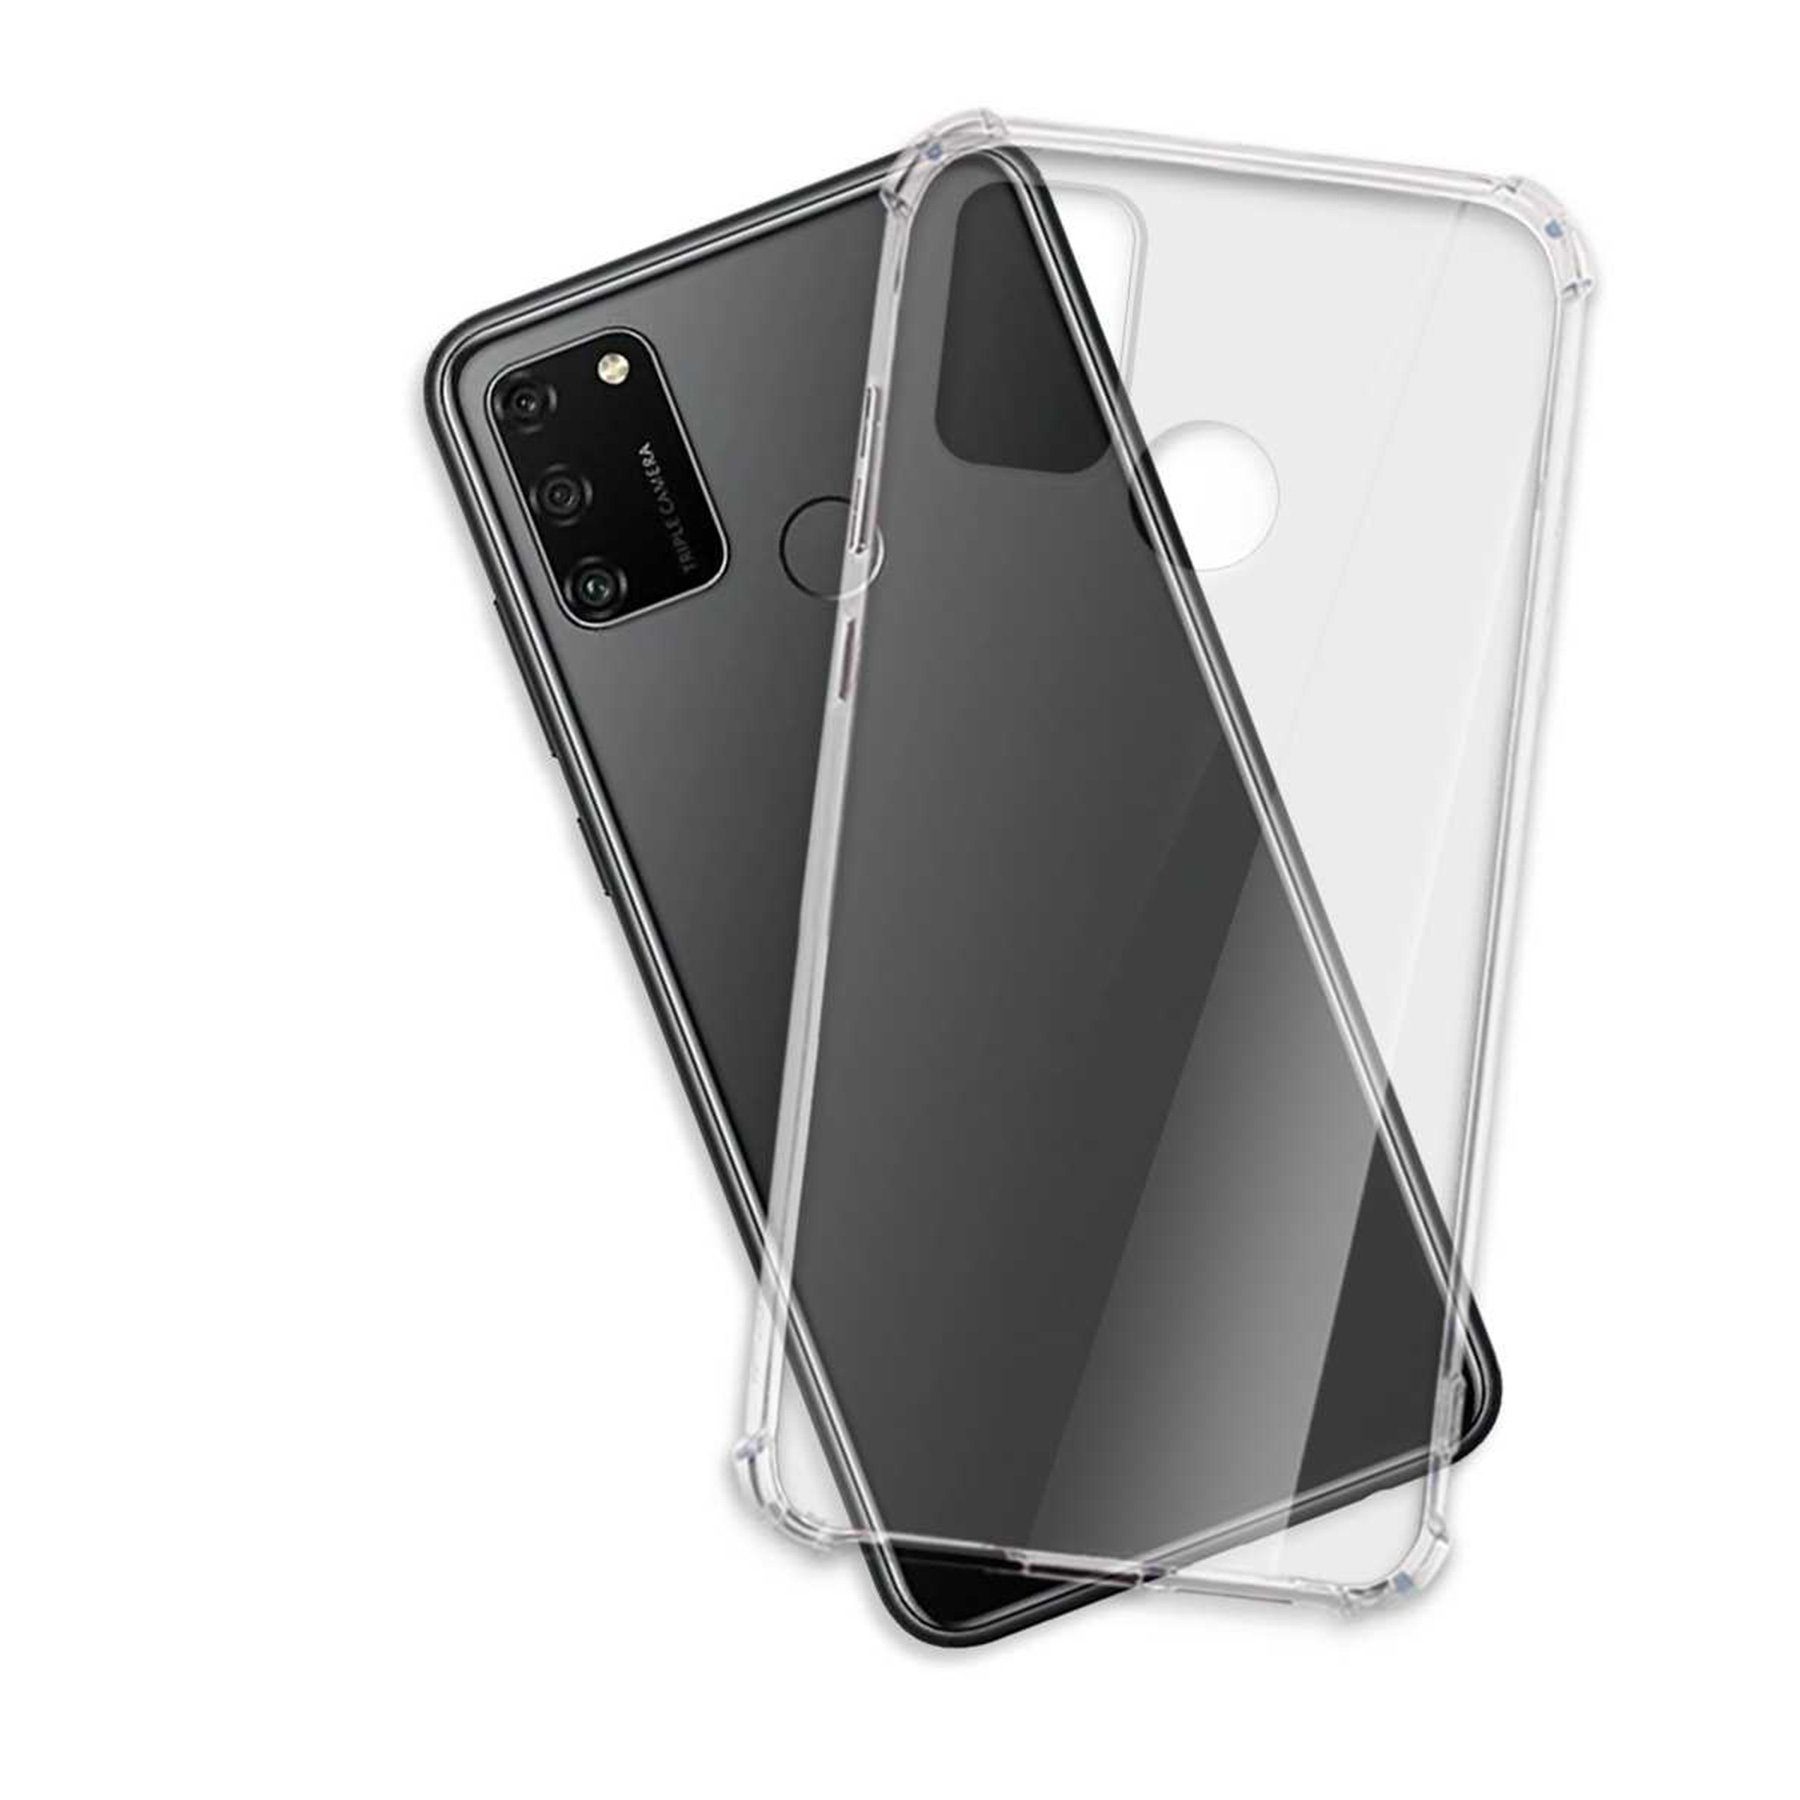 mtb more energy Smartphone-Hülle »TPU Clear Armor Soft« für Honor 9A, Honor  Play 9A (6.3), Schutzhülle Cover Rugged Armor Case Backcover Handyhülle mit  Anti-Shock Verstärkung [CAS-NC272 transparent] online kaufen | OTTO